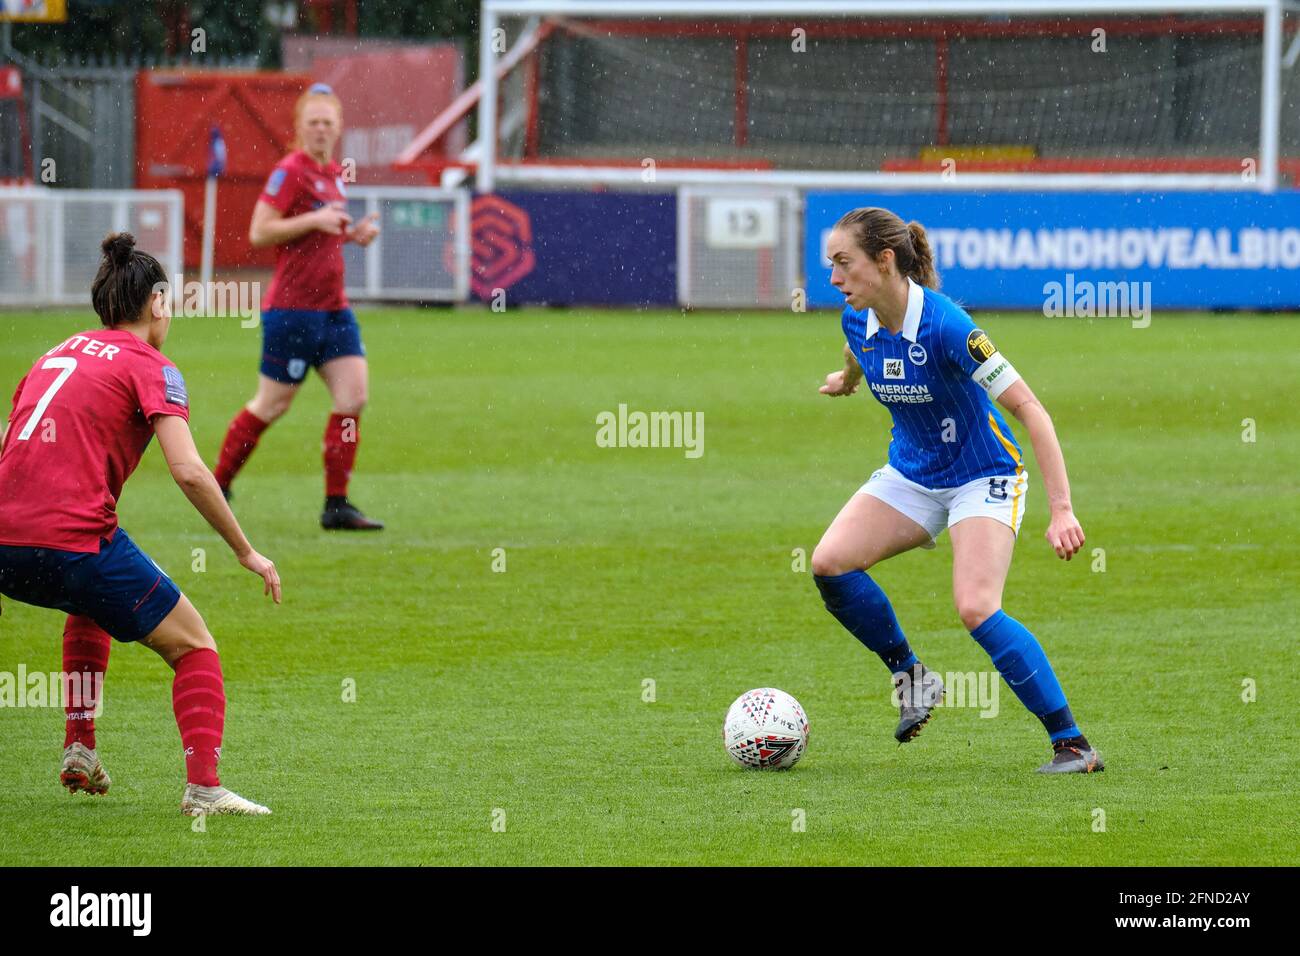 Crawley, UK. 16th May, 2021. Katie Nutter (7 Huddersfield Town) closing down Megan Connolly (8 Brighton & Hove Albion) during the FA Cup game between Brighton & Hove Albion and Huddersfield Town at The Peoples Pension Stadium in Crawley Credit: SPP Sport Press Photo. /Alamy Live News Stock Photo